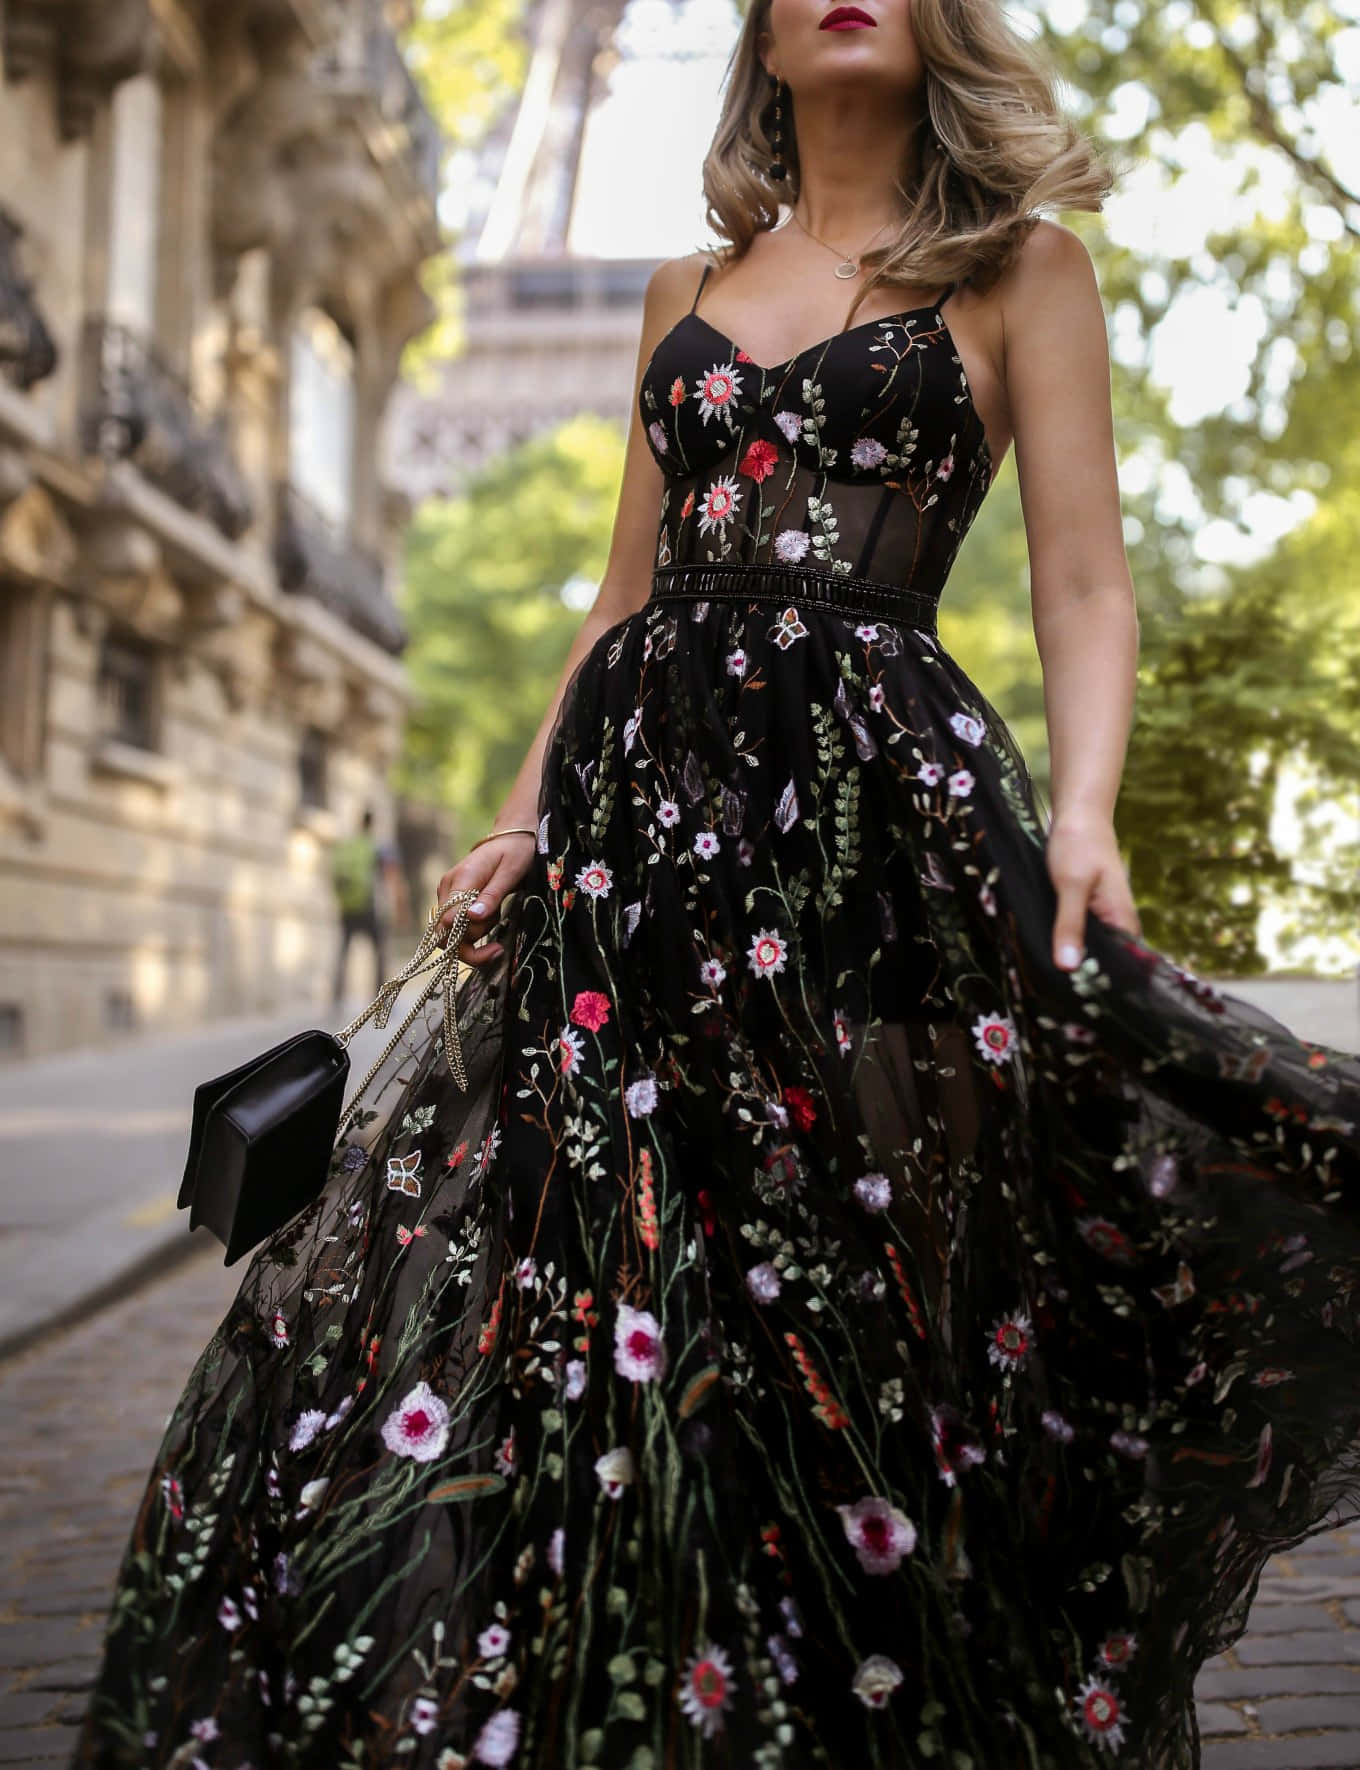 Find your perfect look for a formal evening in one of our beautiful black tie dresses. Wallpaper